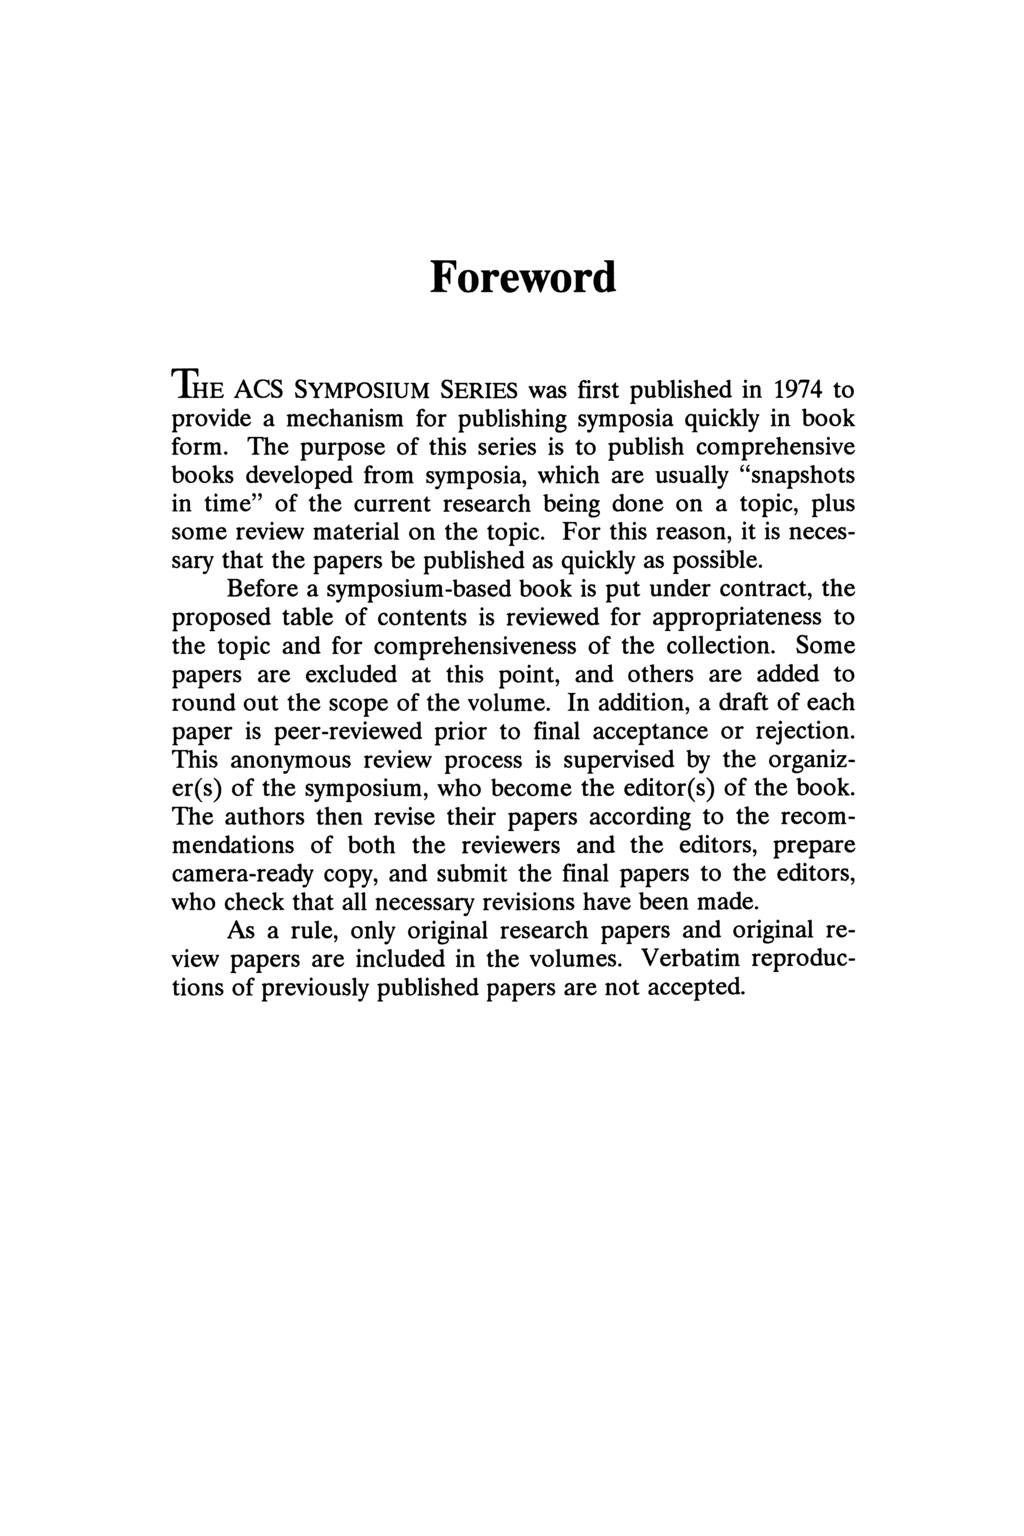 Foreword 1HE ACS SYMPOSIUM SERIES was first published in 1974 to provide a mechanism for publishing symposia quickly in book form.